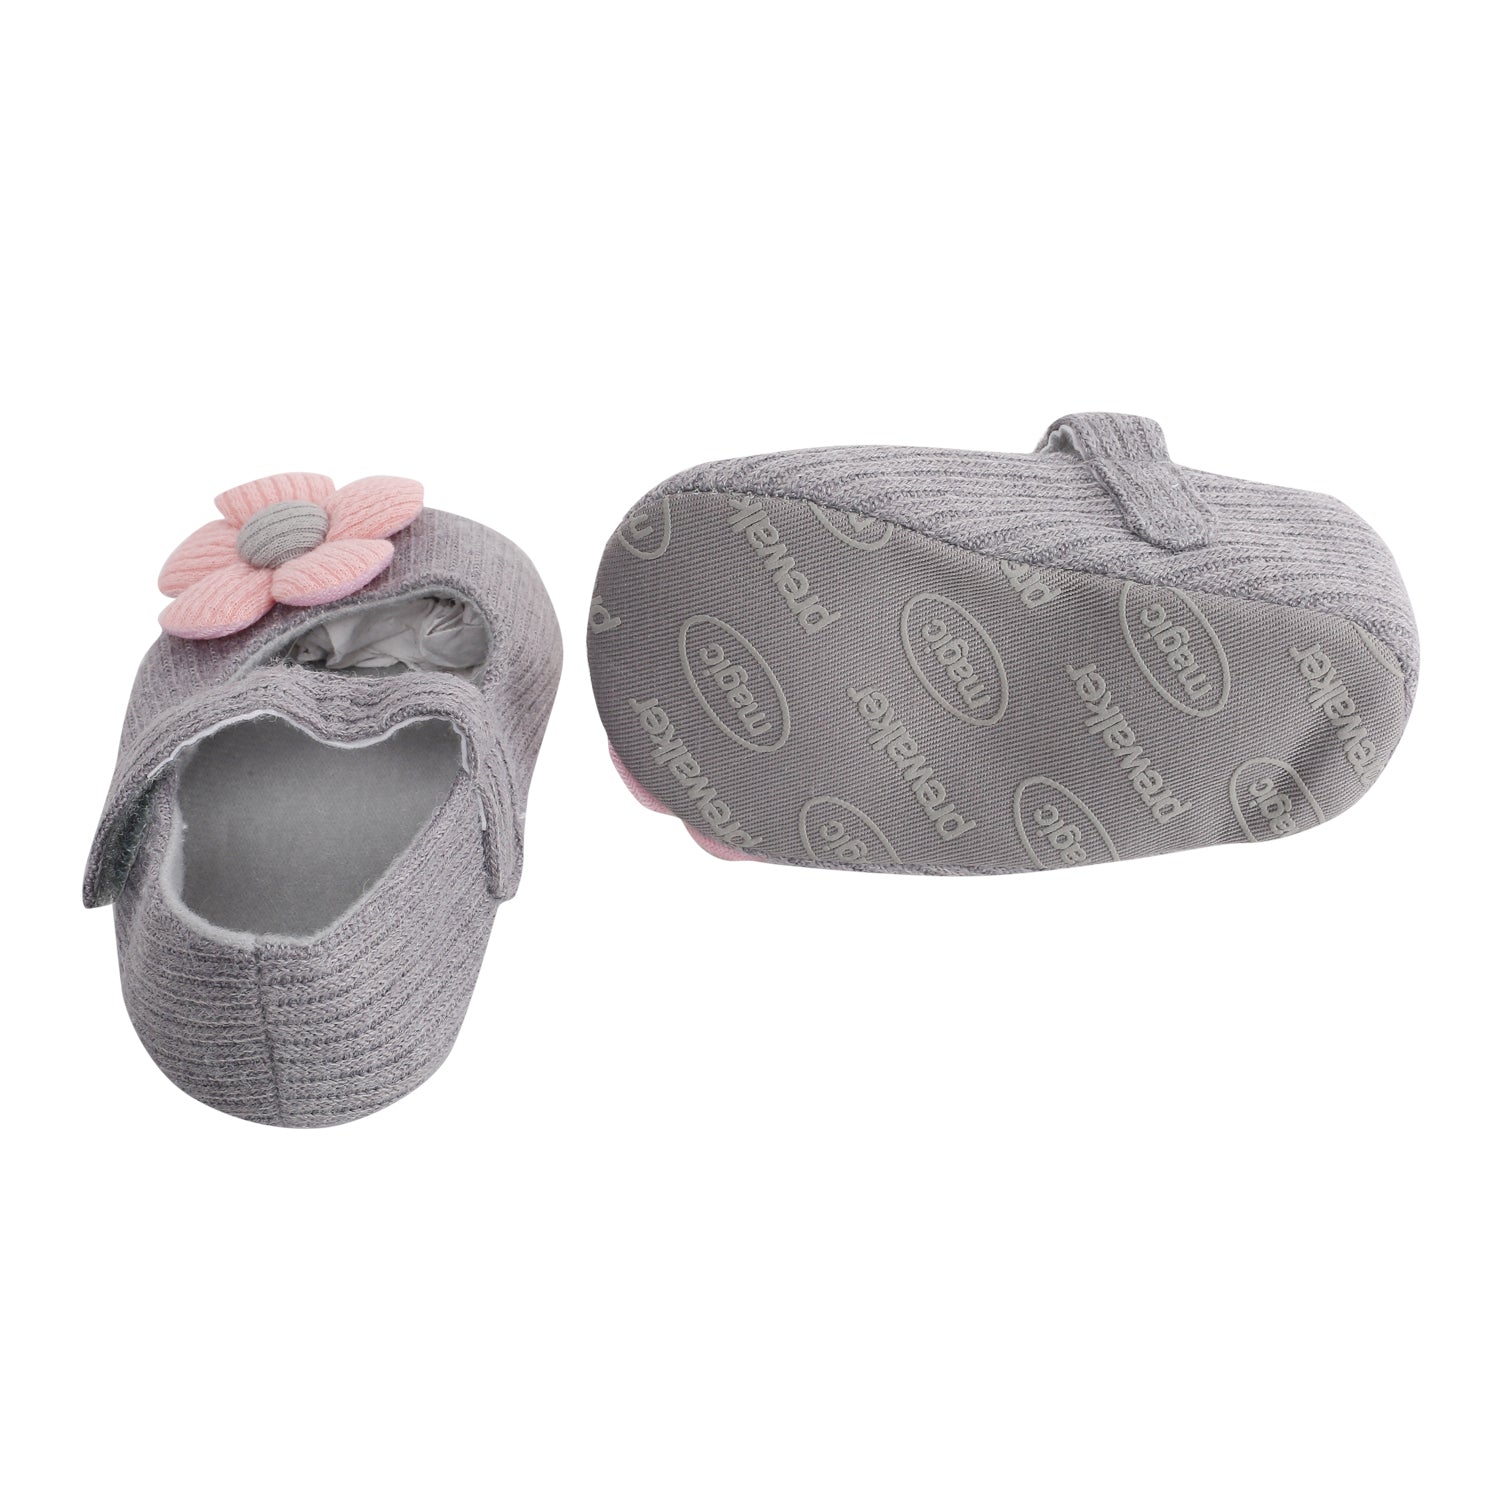 Baby Moo Floral Applique Grey And Peach Booties - Baby Moo